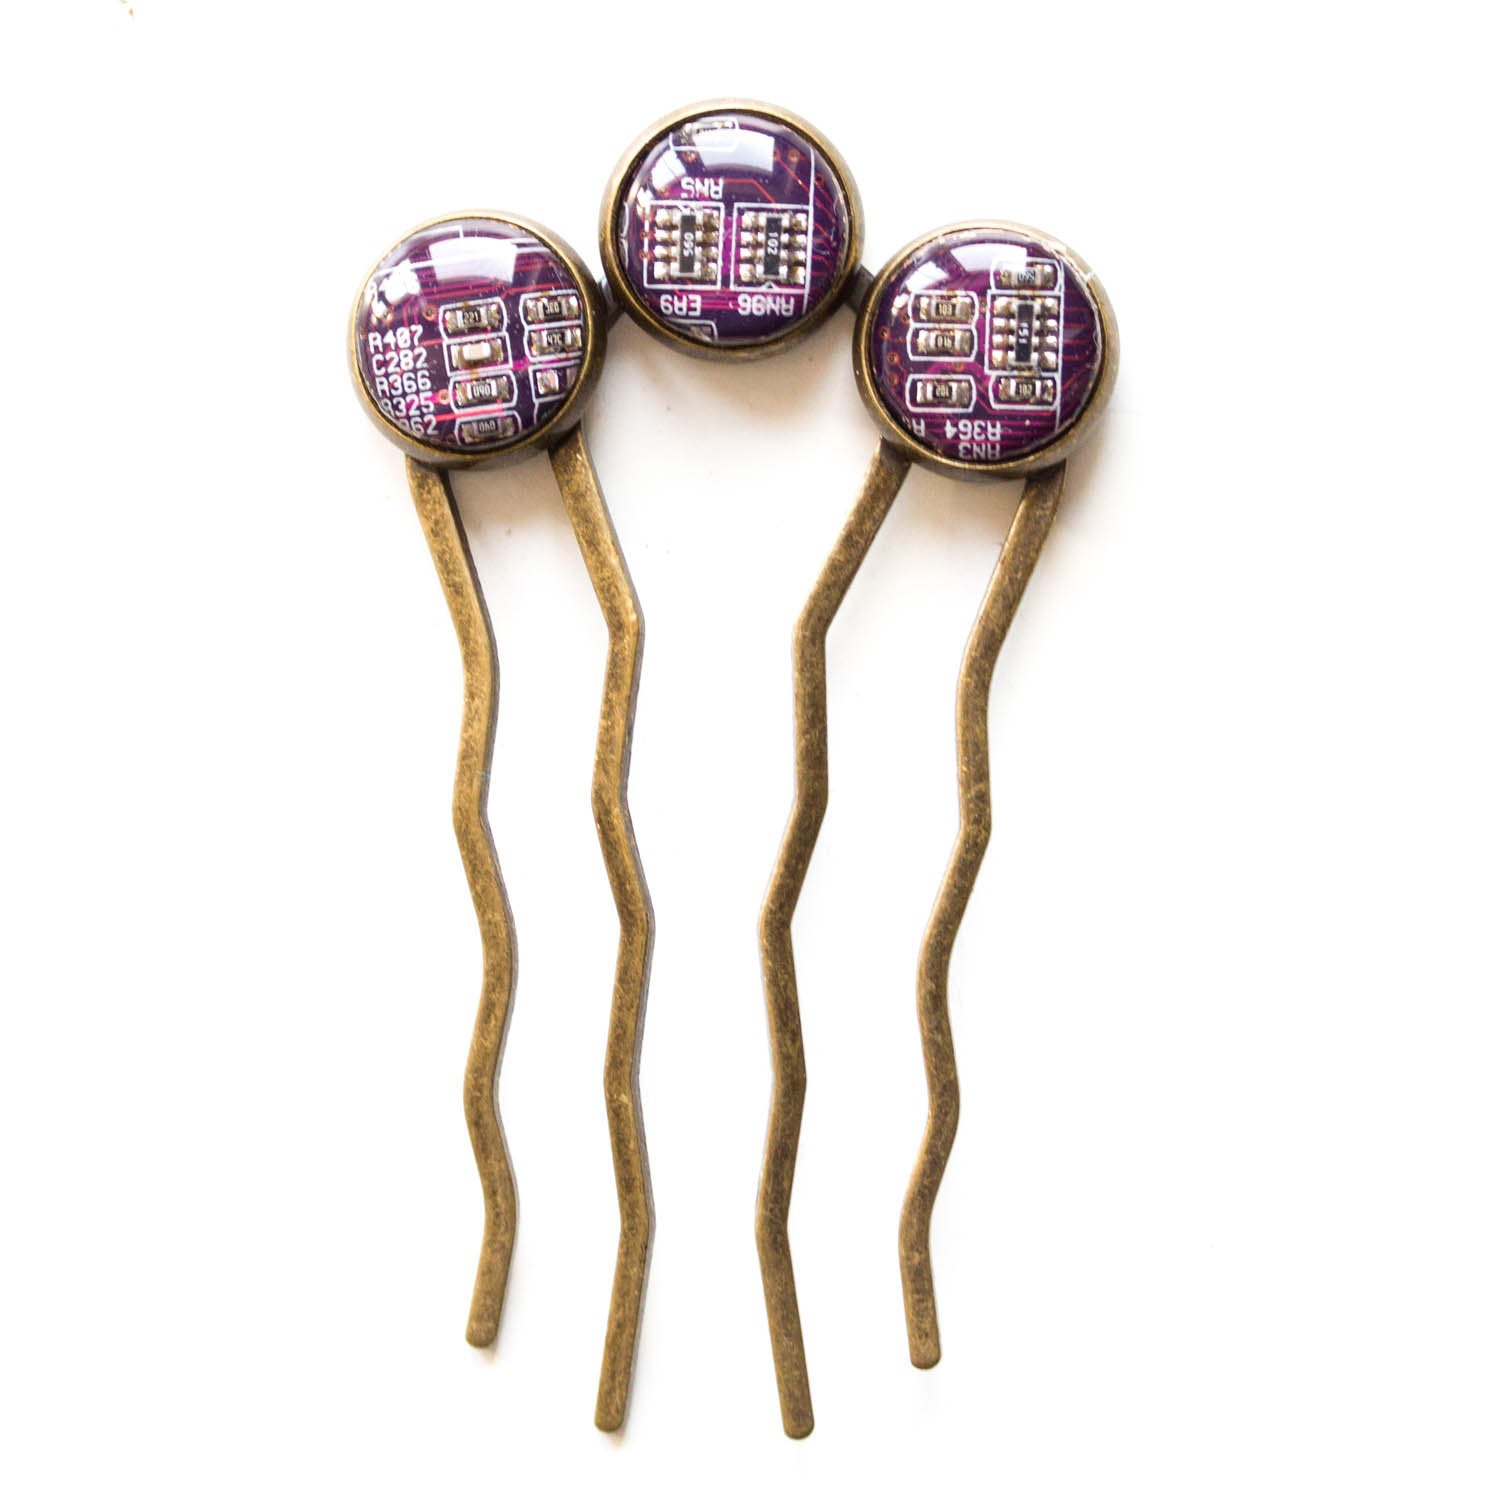 Colorful hair comb with three recycled circuit board pieces, unique hair accessory